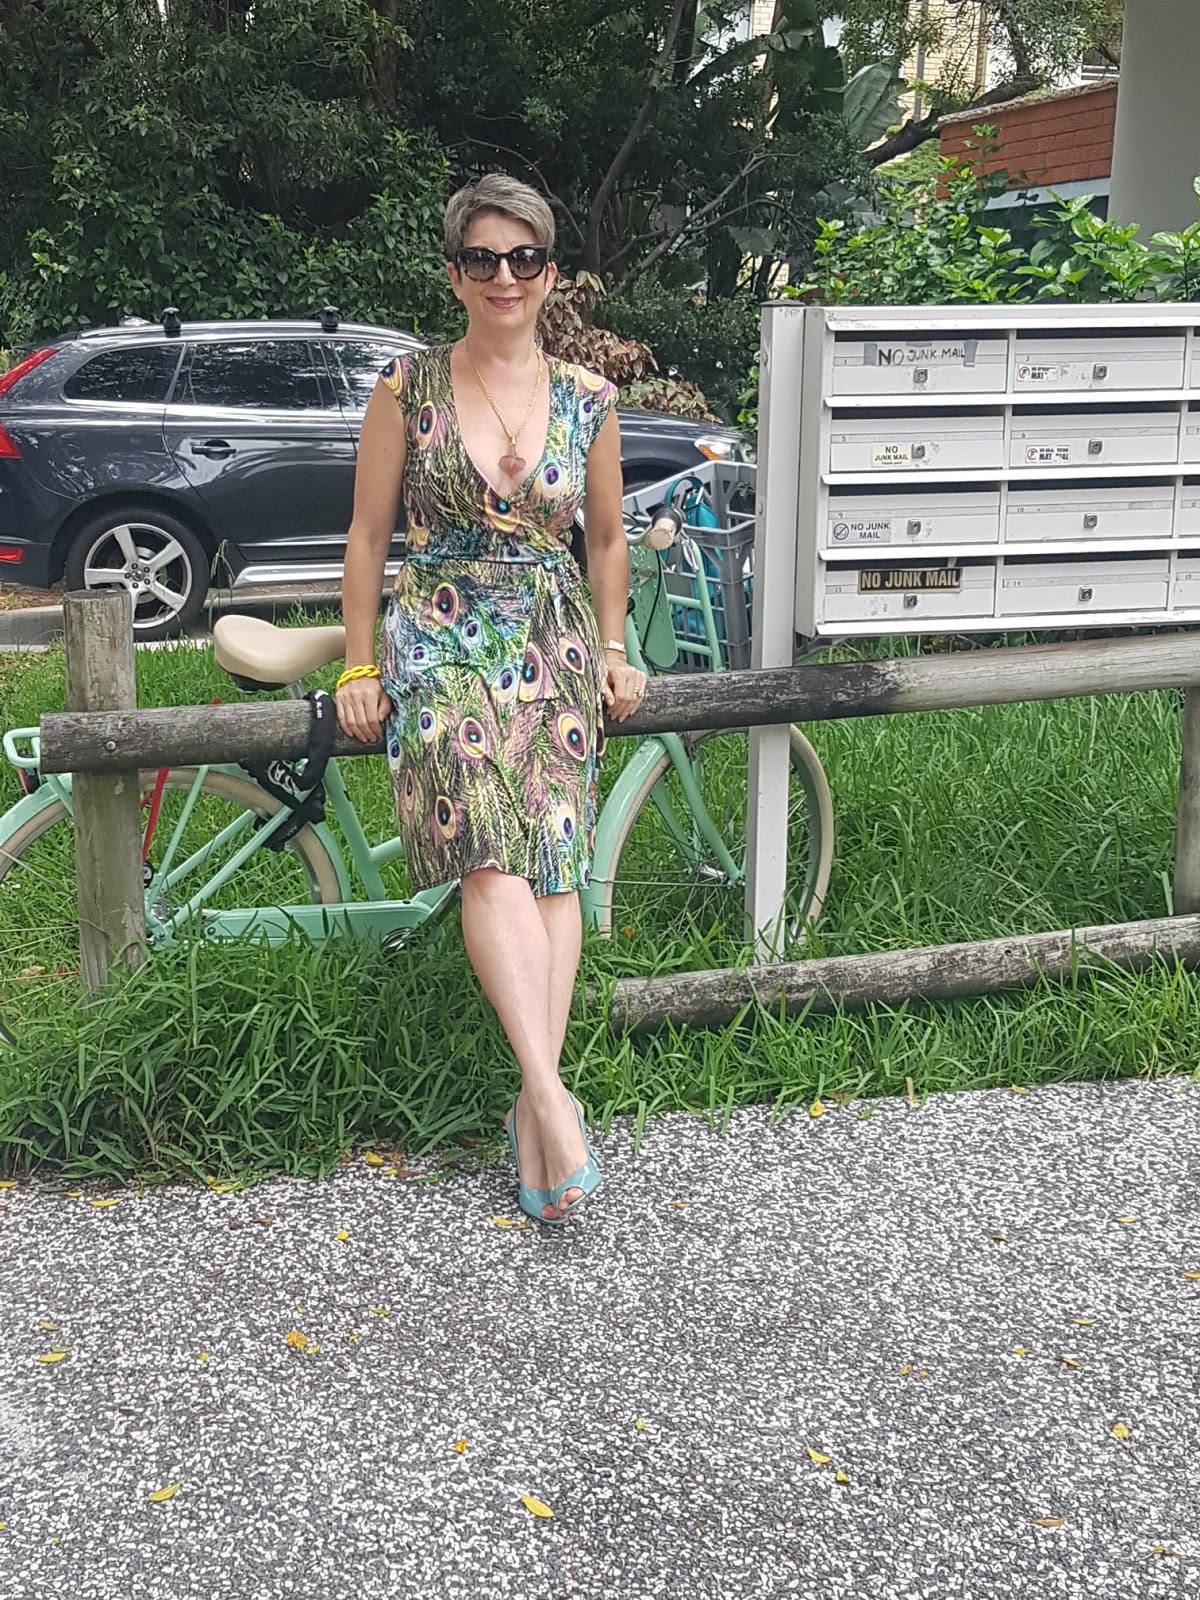 Looking Fabulous @ Fifty: A WRAP DRESS FOR A HOT SUMMER DAY